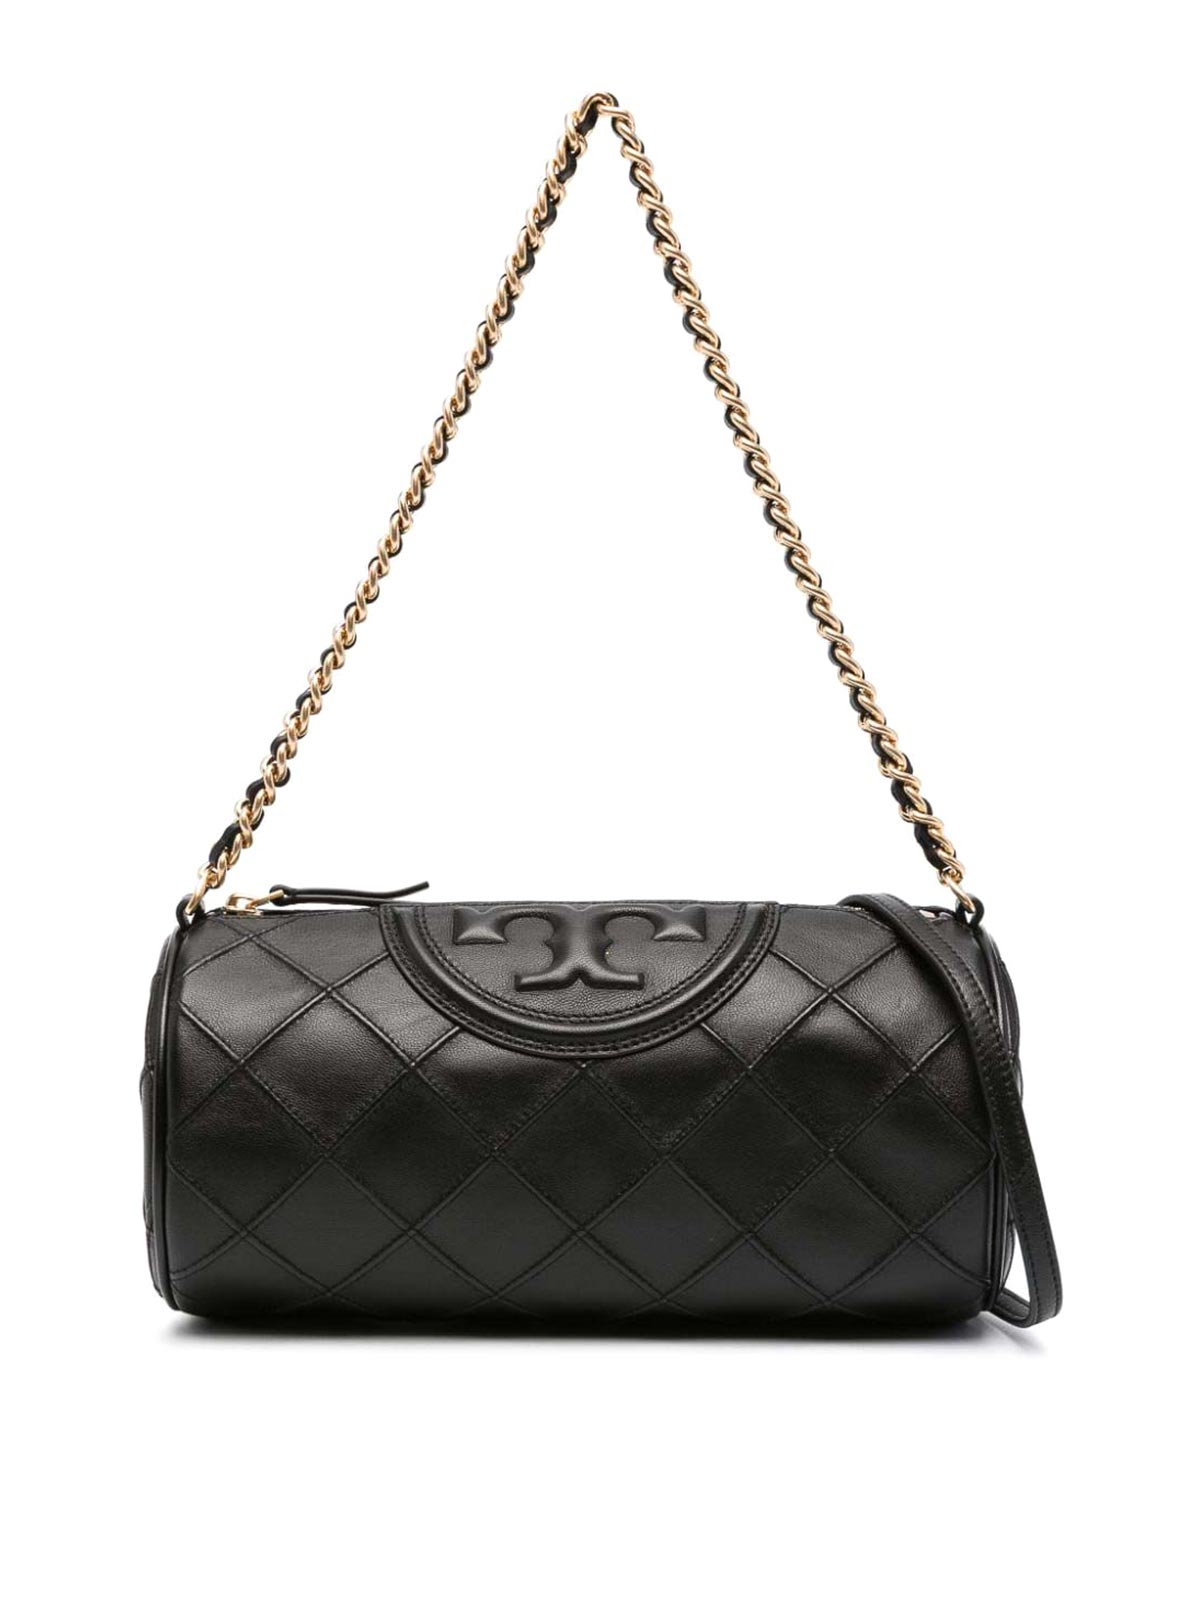 Tory Burch Fleming Soft Leather Barrel Bag In Negro